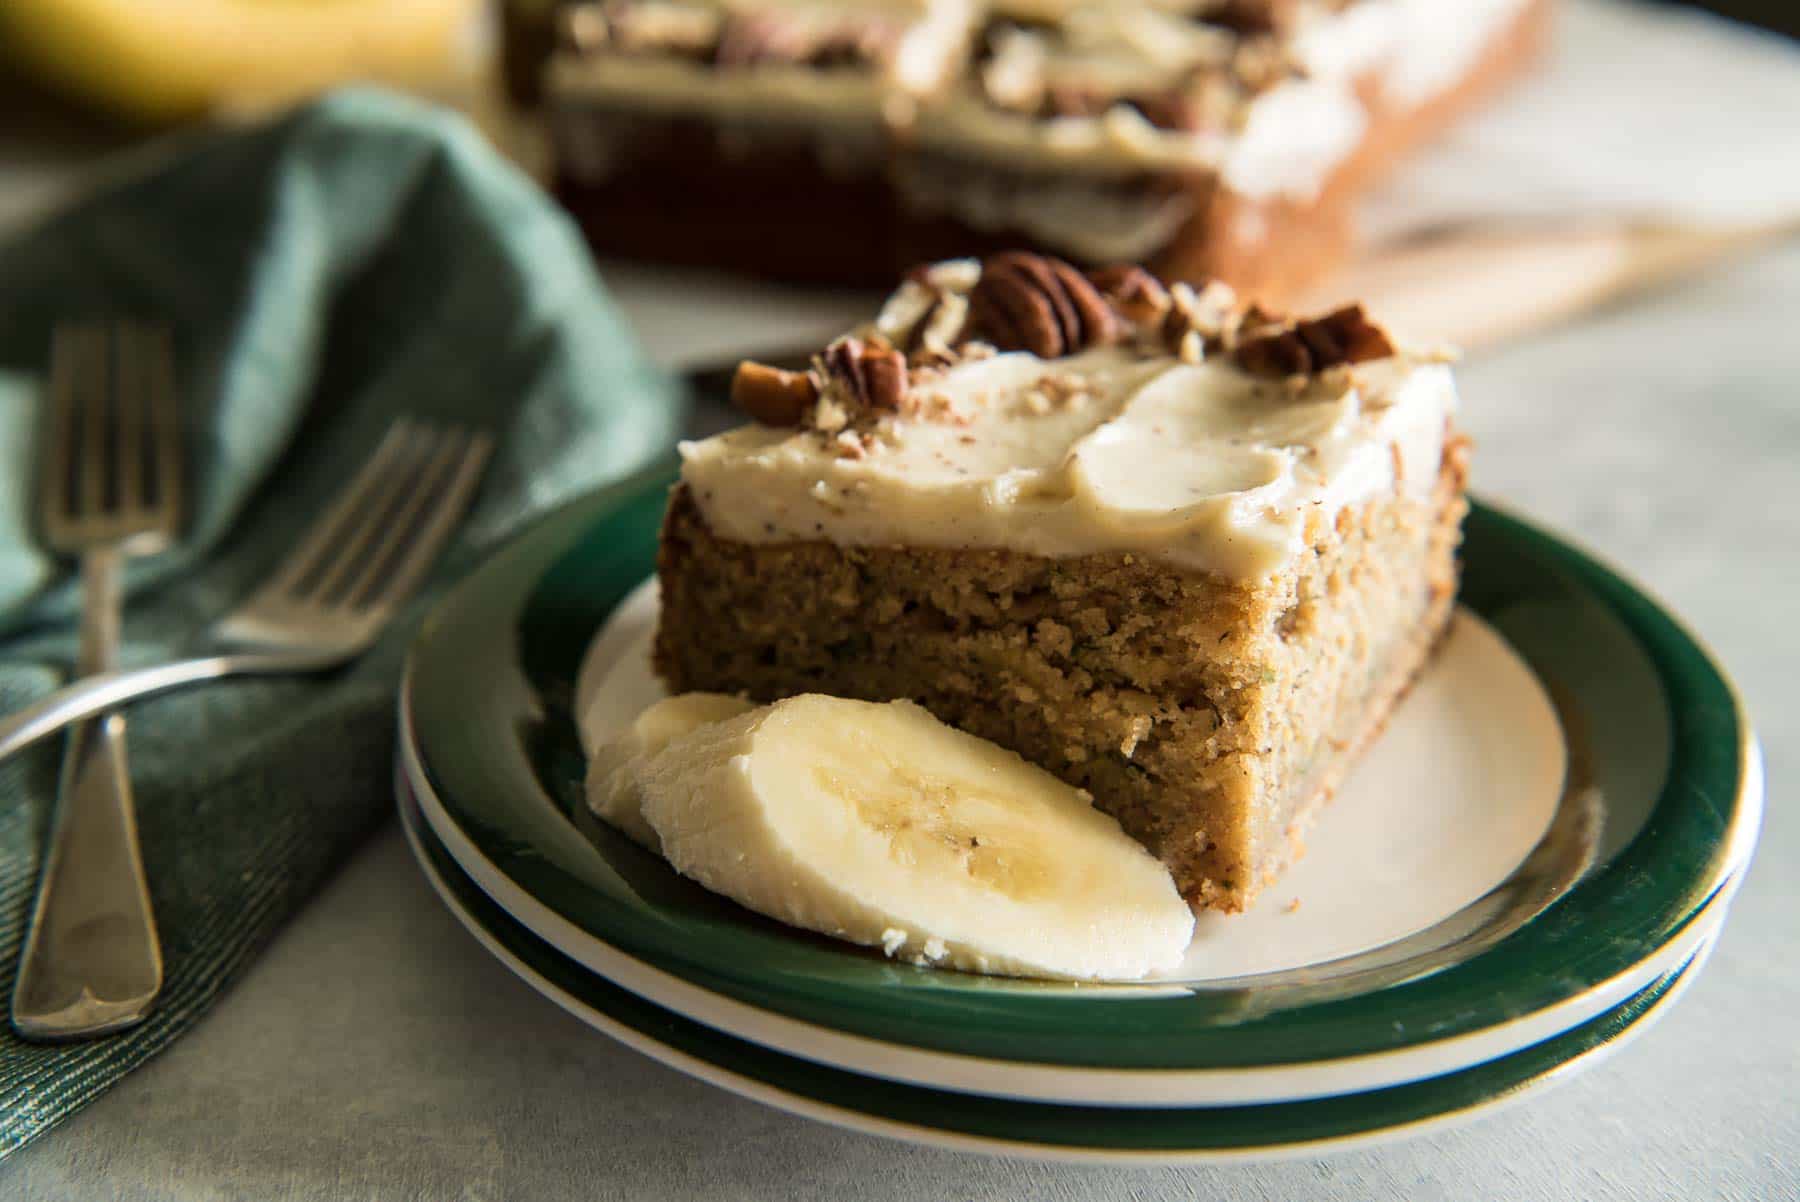 Bridging the gap between summer and fall, this Chai-Spiced Banana Zucchini Cake is ridiculously moist and full of flavor. Don't skimp on the brown butter cream cheese icing - it will be your new fave!